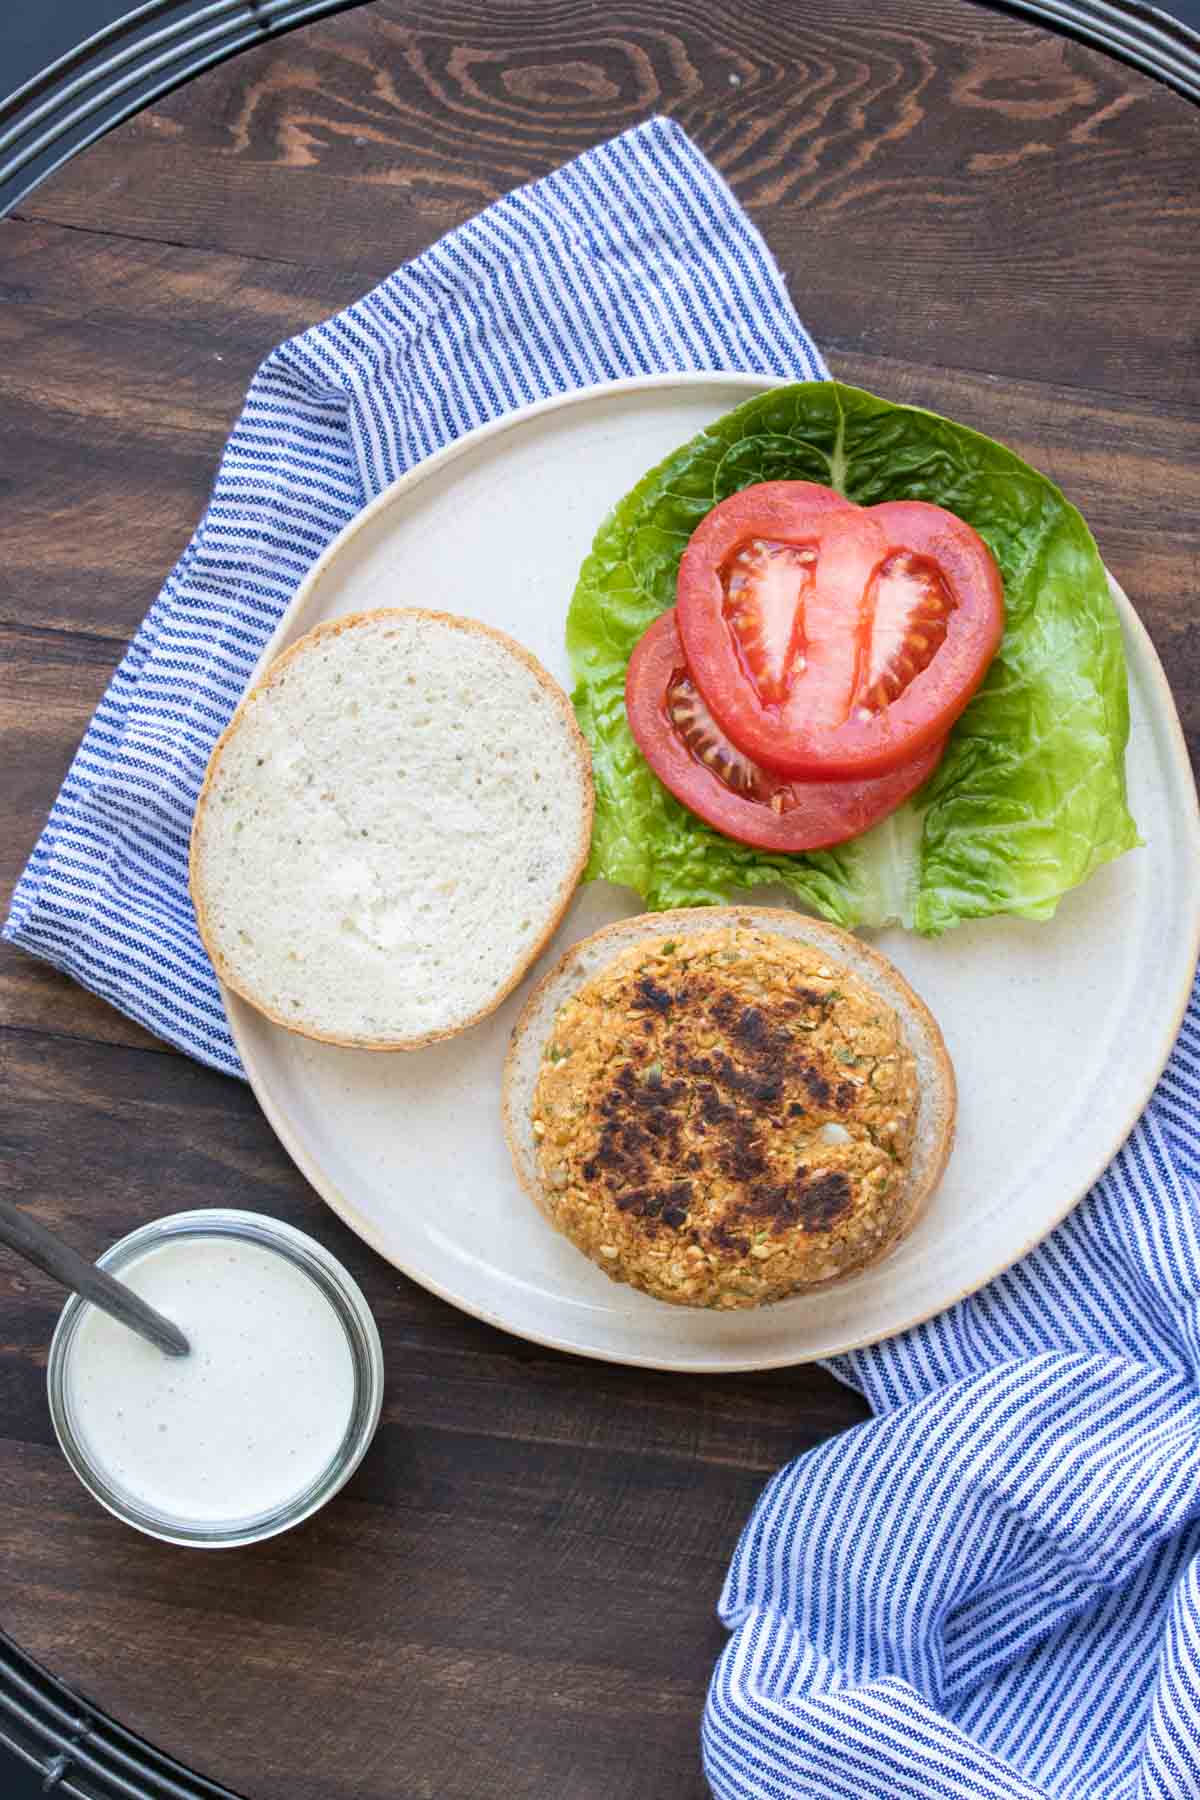 Open face chickpea burger on a bun next to lettuce, tomato and sauce